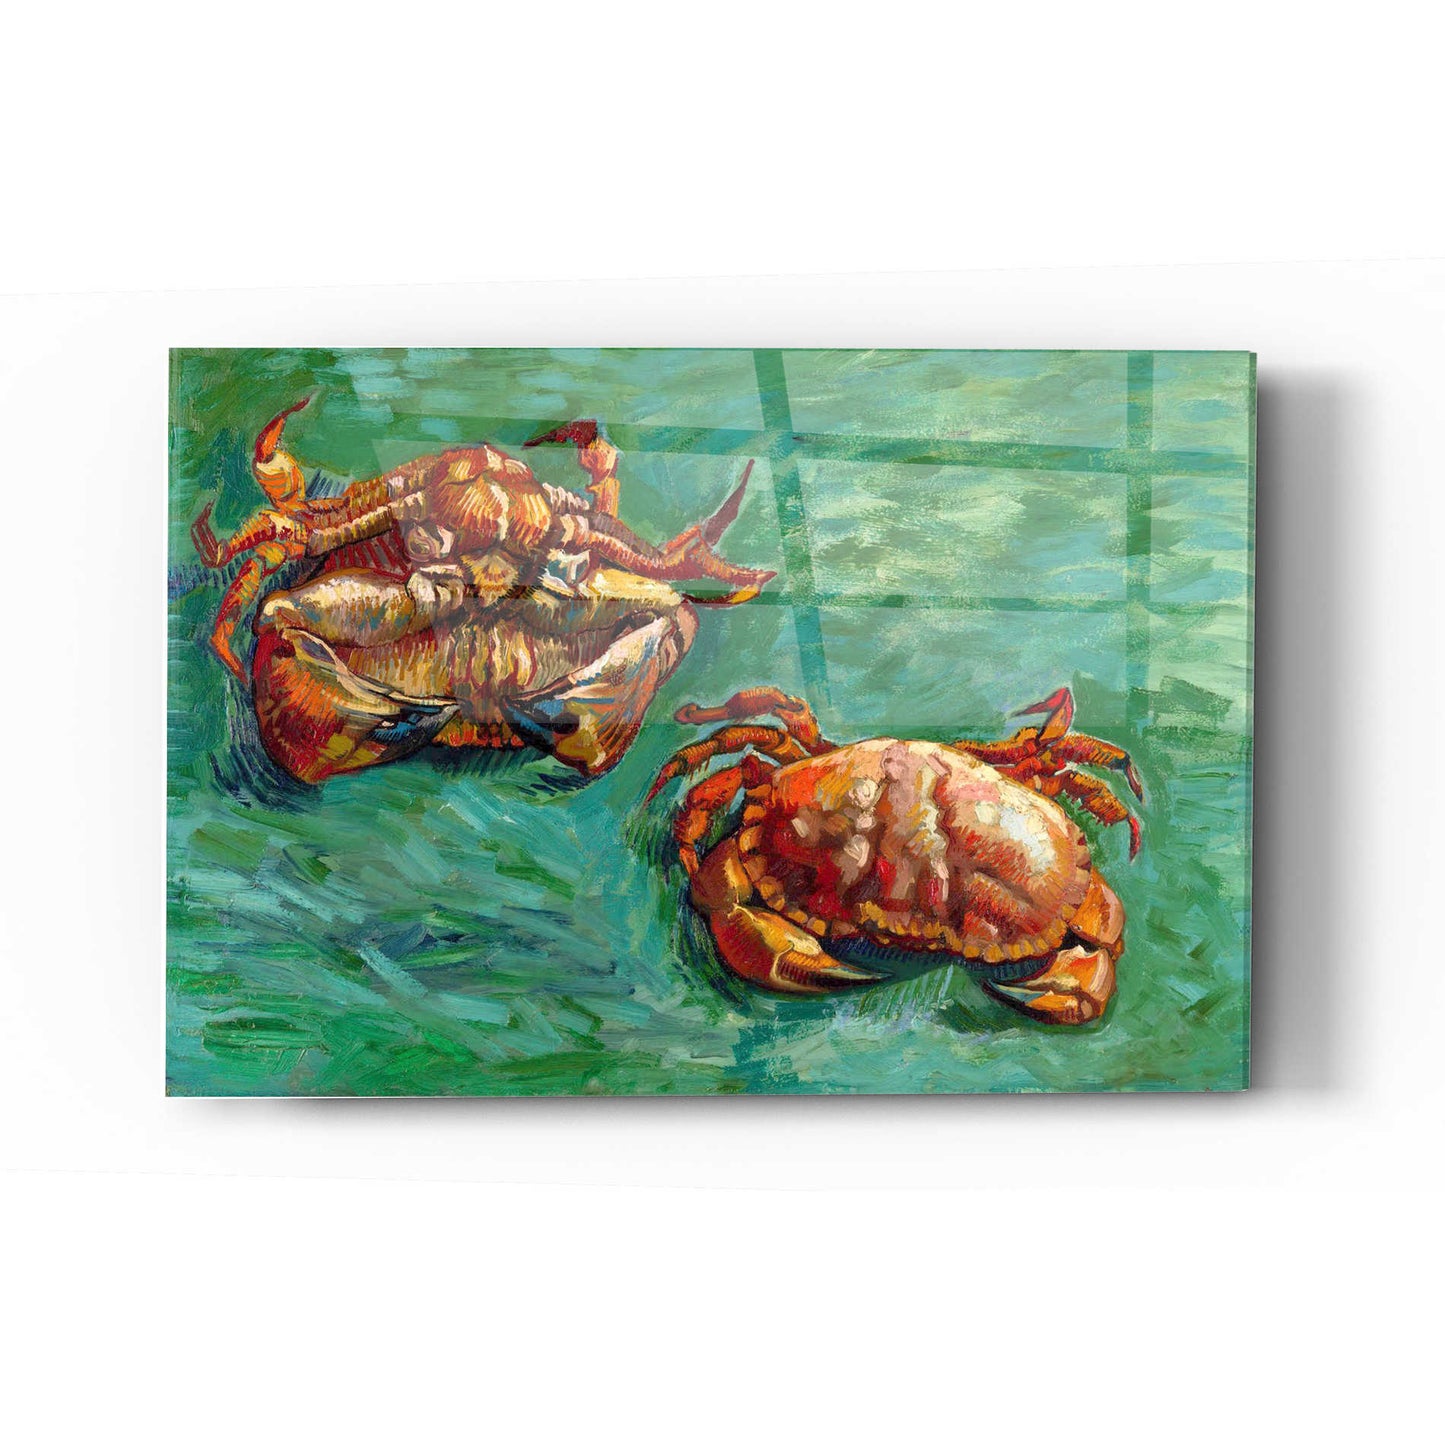 Epic Art 'Two Crabs' by Vincent Van Gogh Acrylic Glass Wall Art,24x36